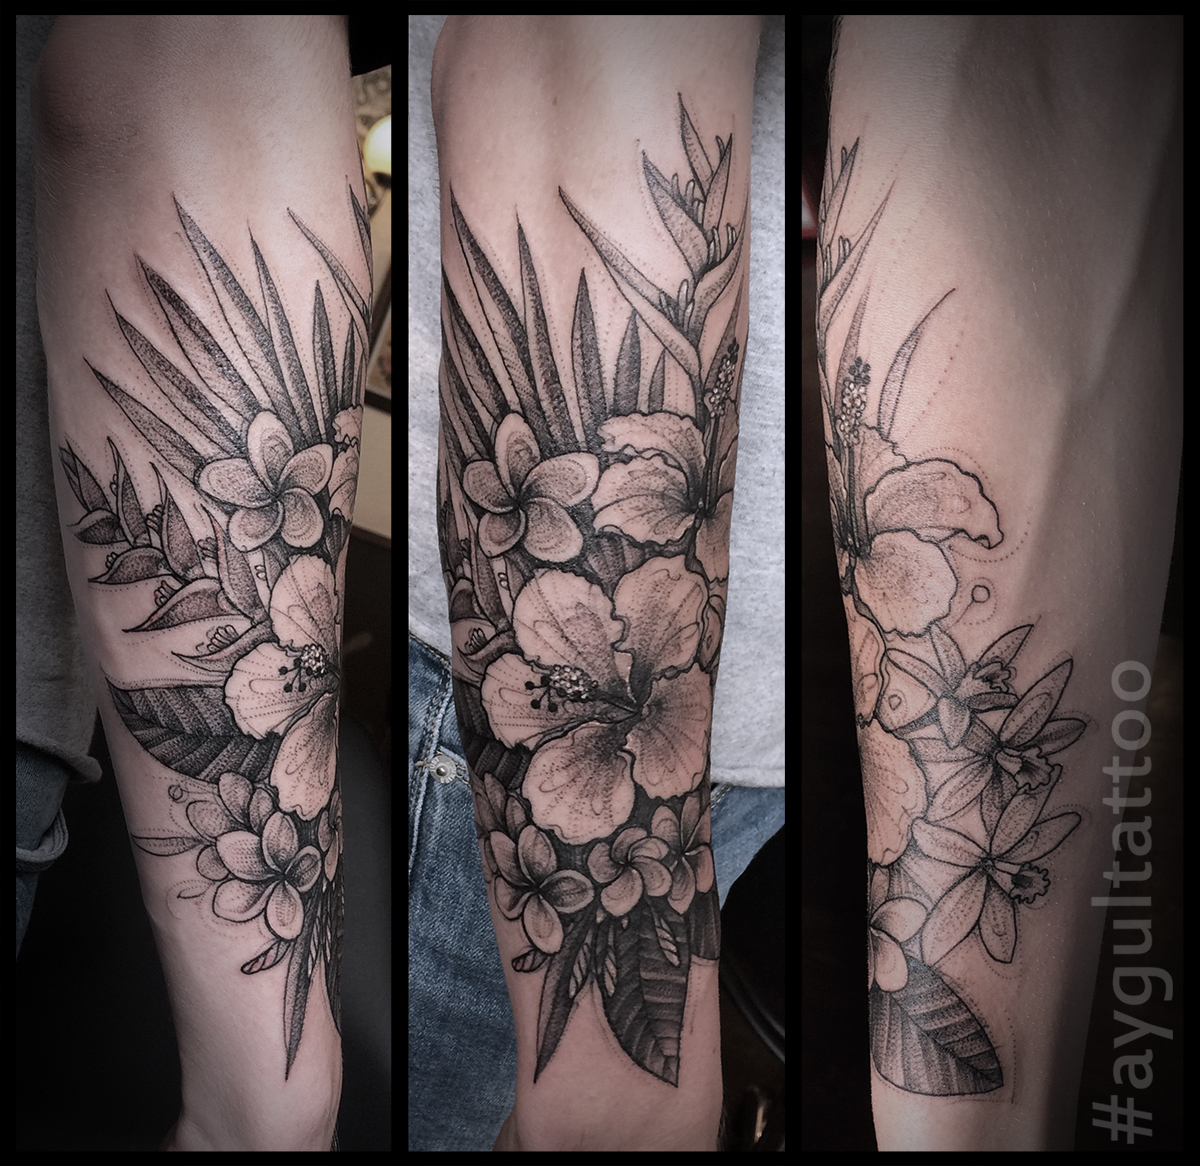 Floral tattoos  MalanTattoo  Highest Quality Tattoos Handmade  Sculptures Paintings and Drawings Germany Neuwied